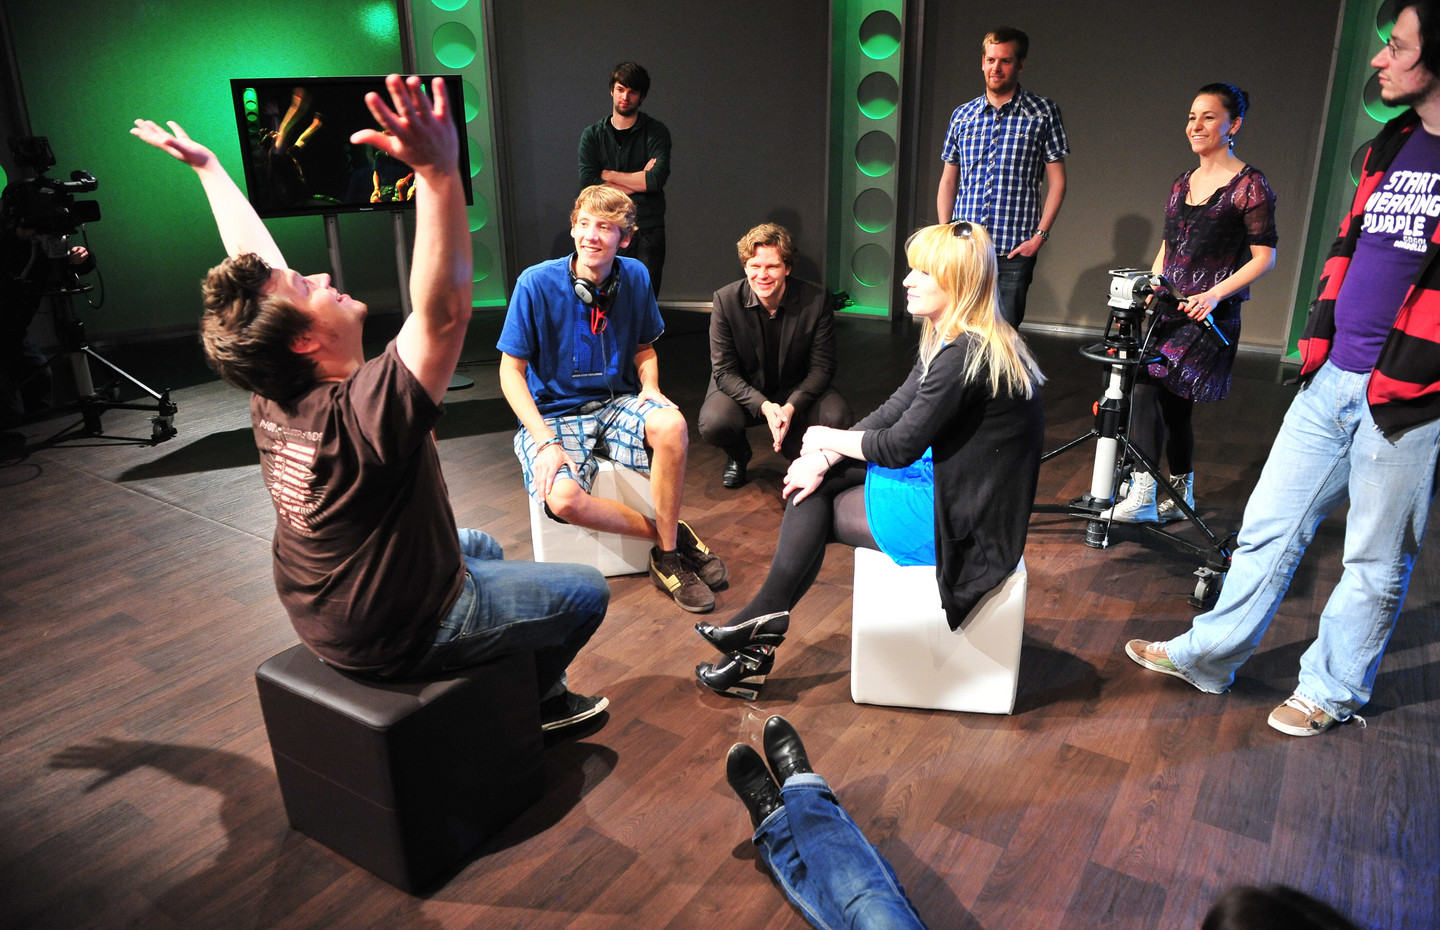 Students are sitting and talking in a TV studio